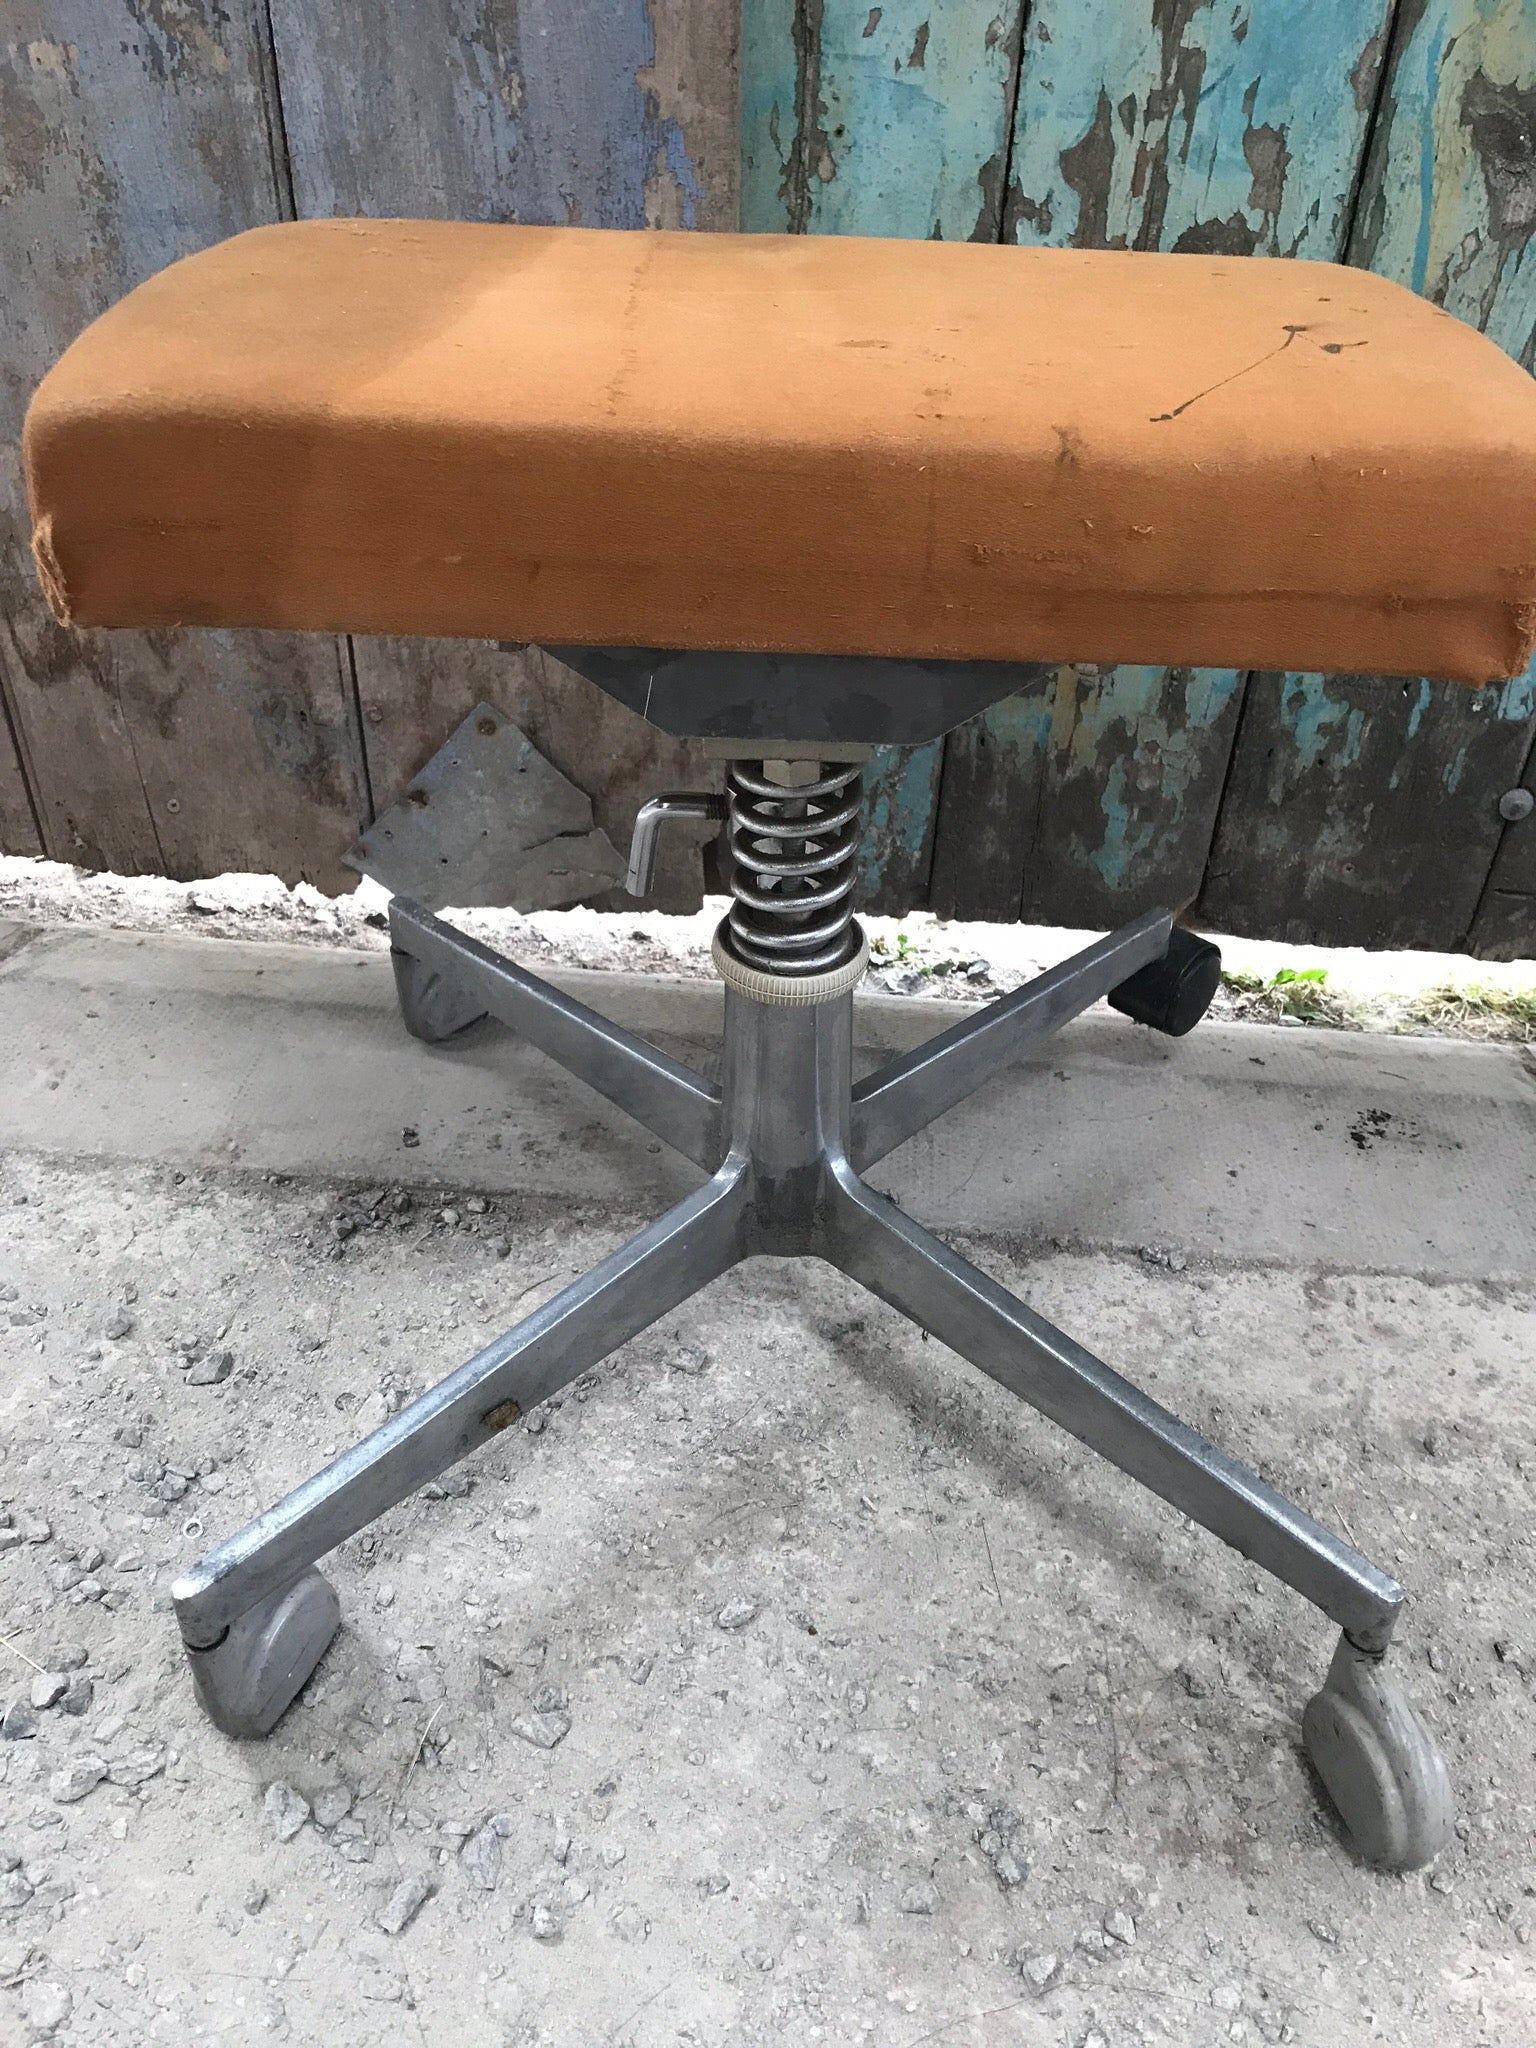 Vintage Evertaut chair style Industrial Workshop office dental doctors inspection stool chair